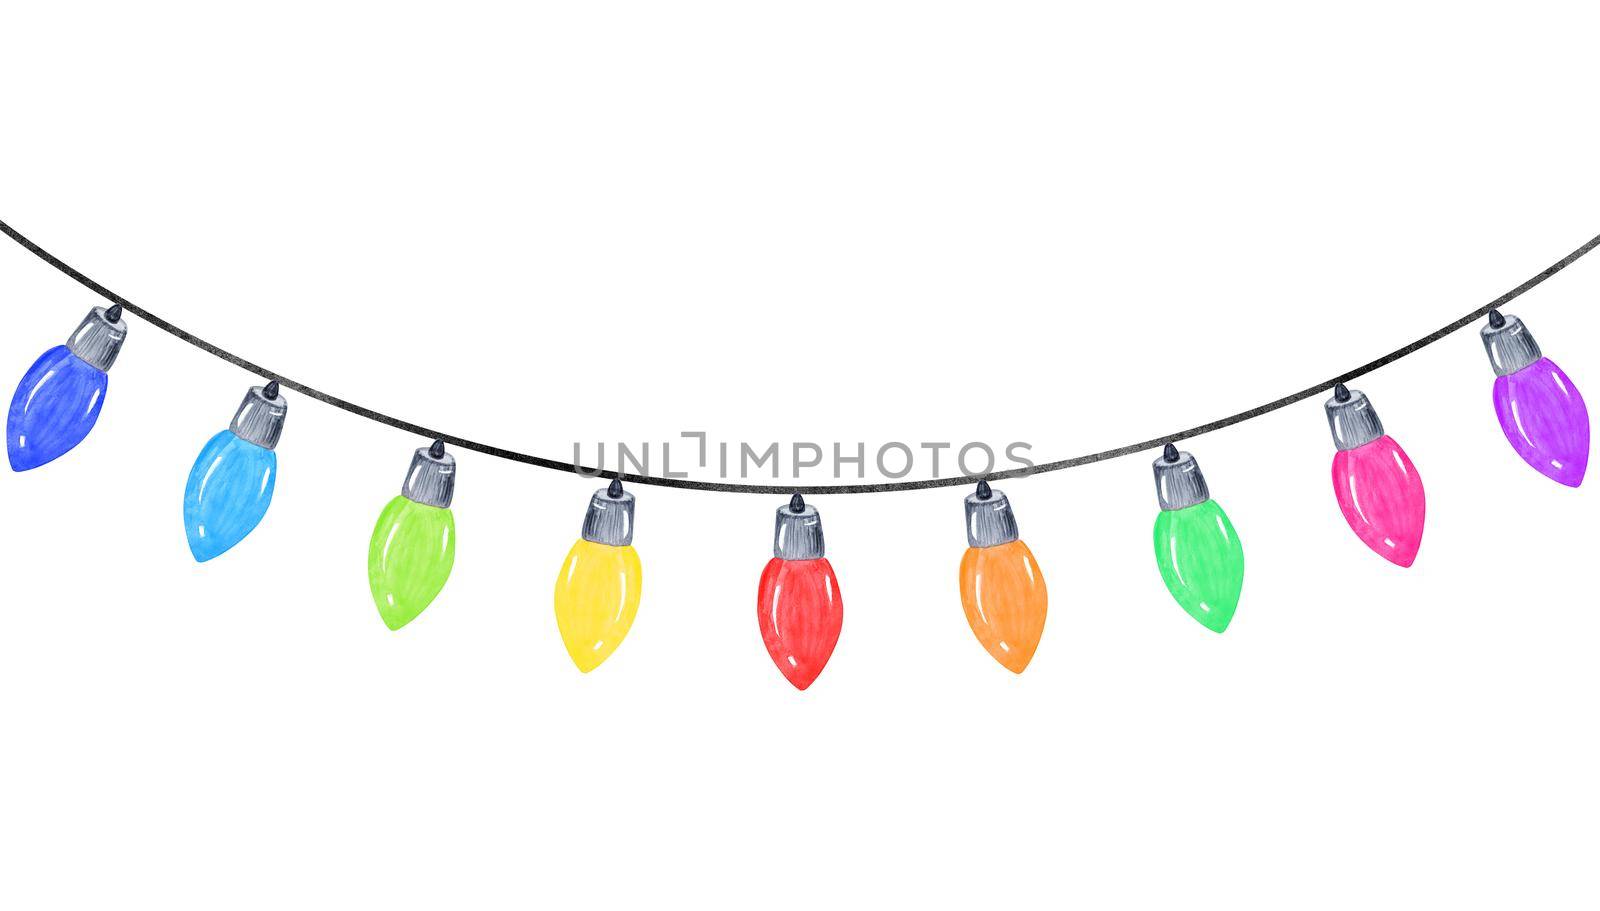 watercolor garland with color light bulbs isolated on white background. Christmas and birthday decoration. Holiday greeting cards border